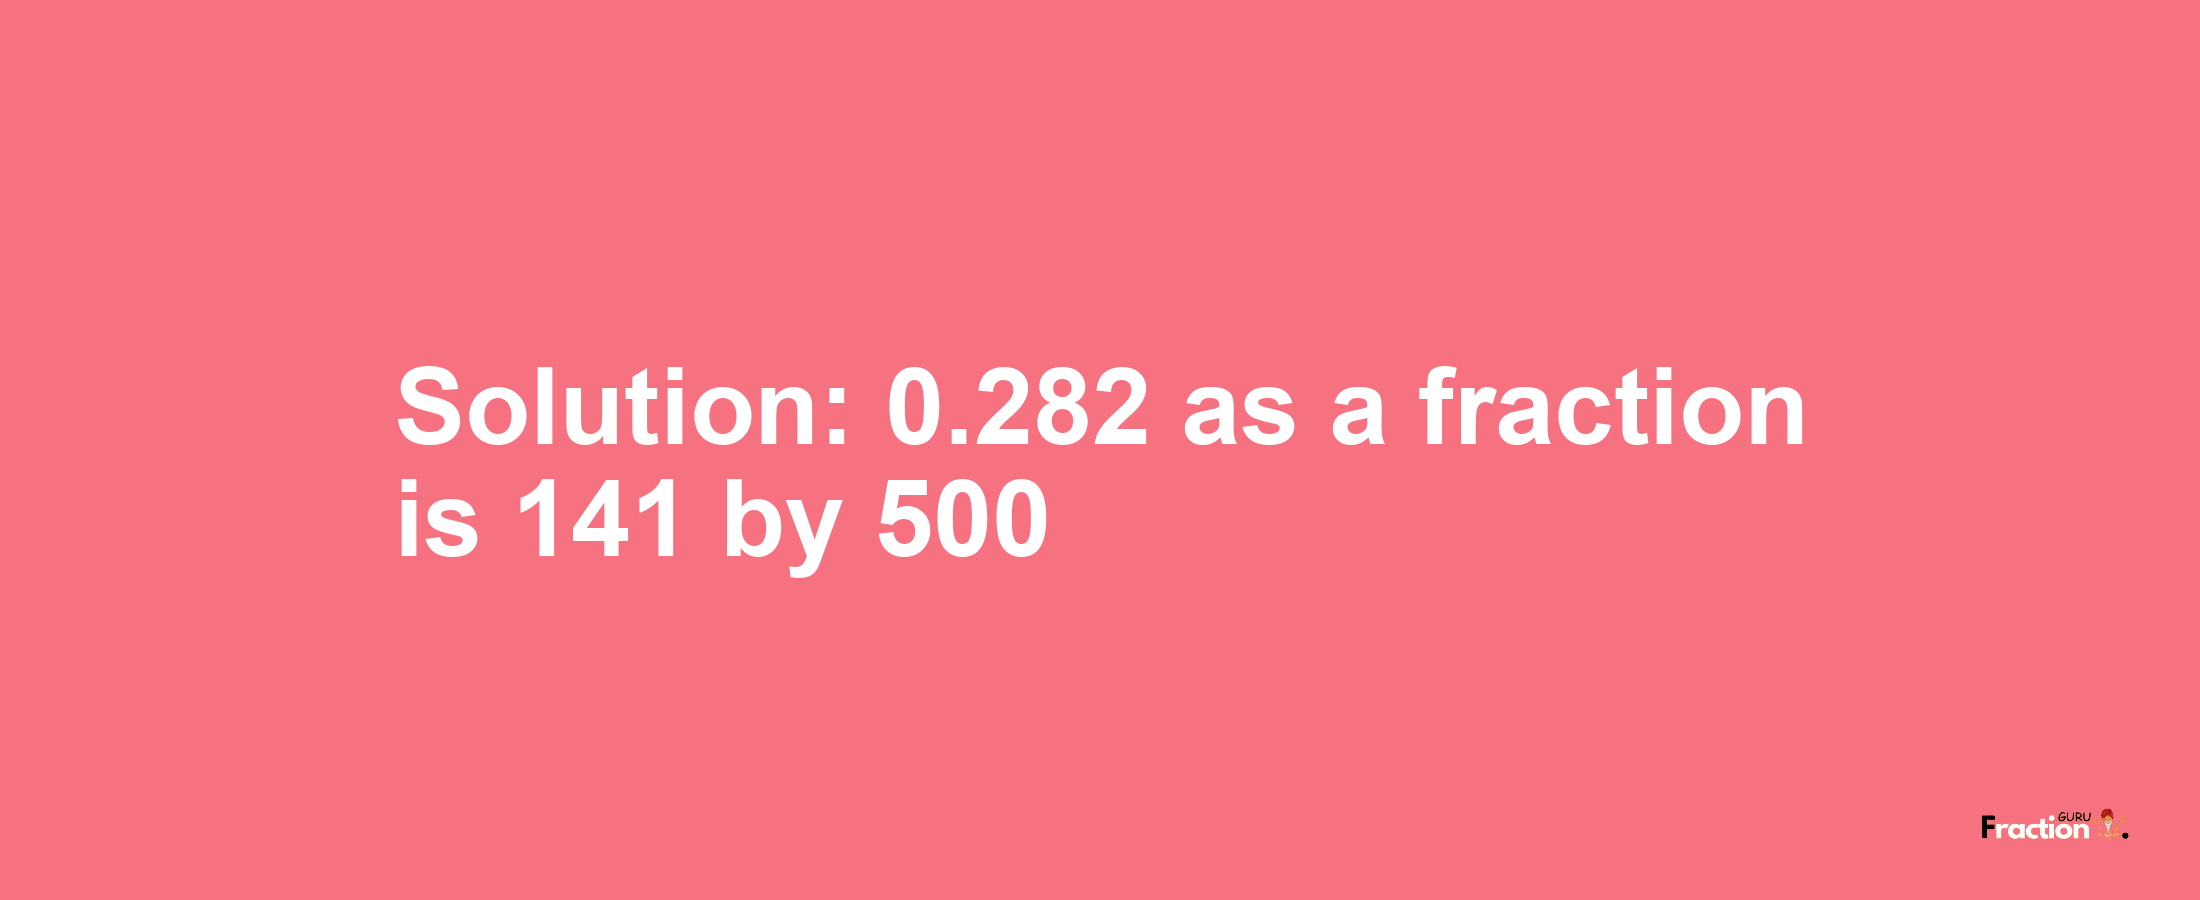 Solution:0.282 as a fraction is 141/500